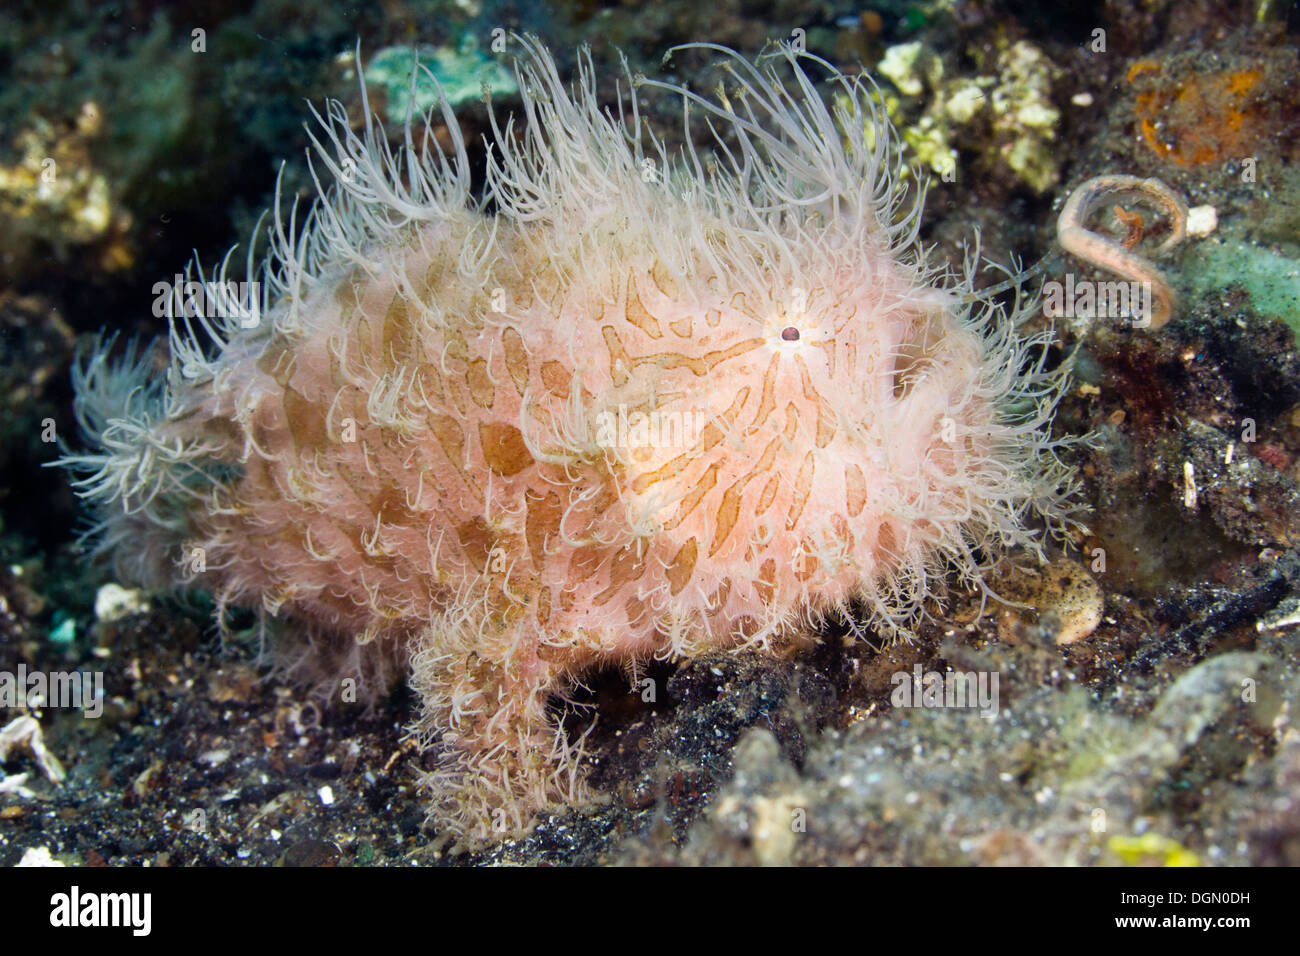 Hairy or striated frogfish - Antennarius striatus with lure to attract prey, Lembeh Strait, Indonesia Stock Photo